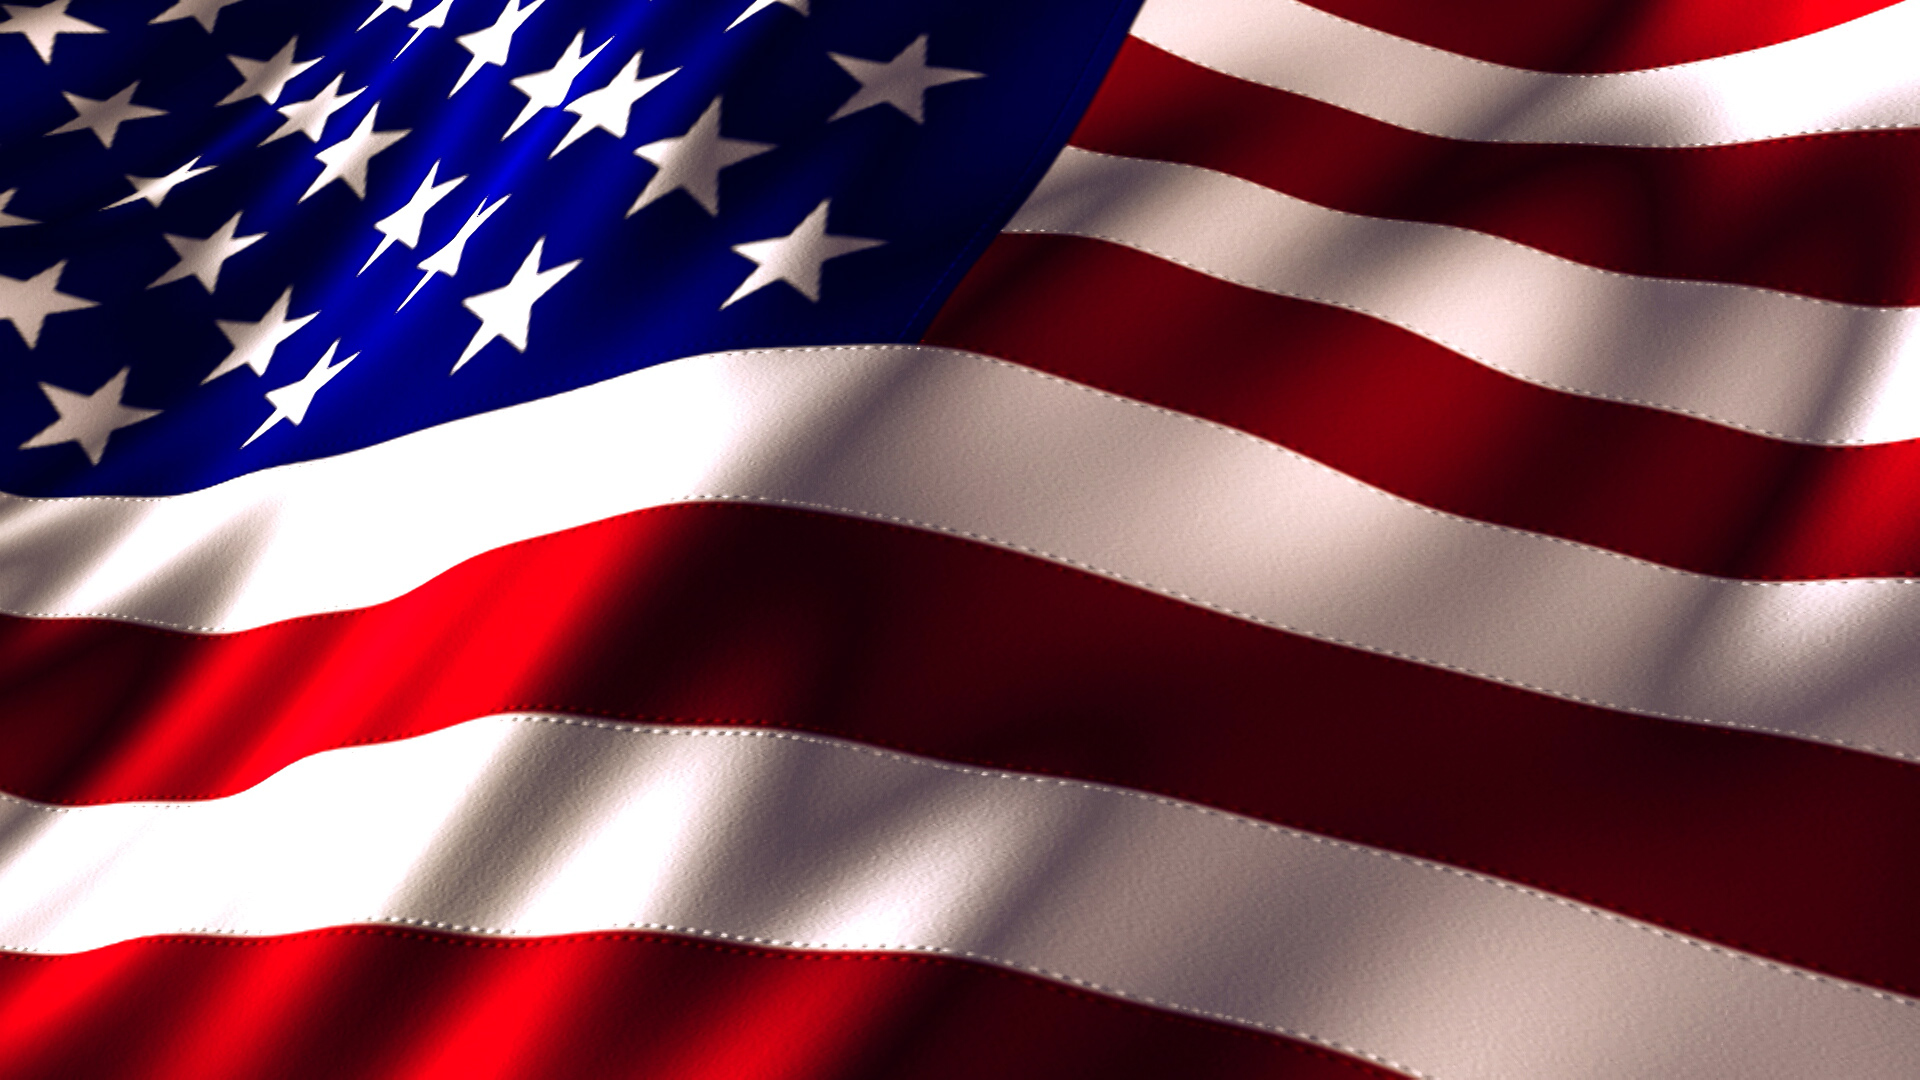 beautiful quality american flag image background